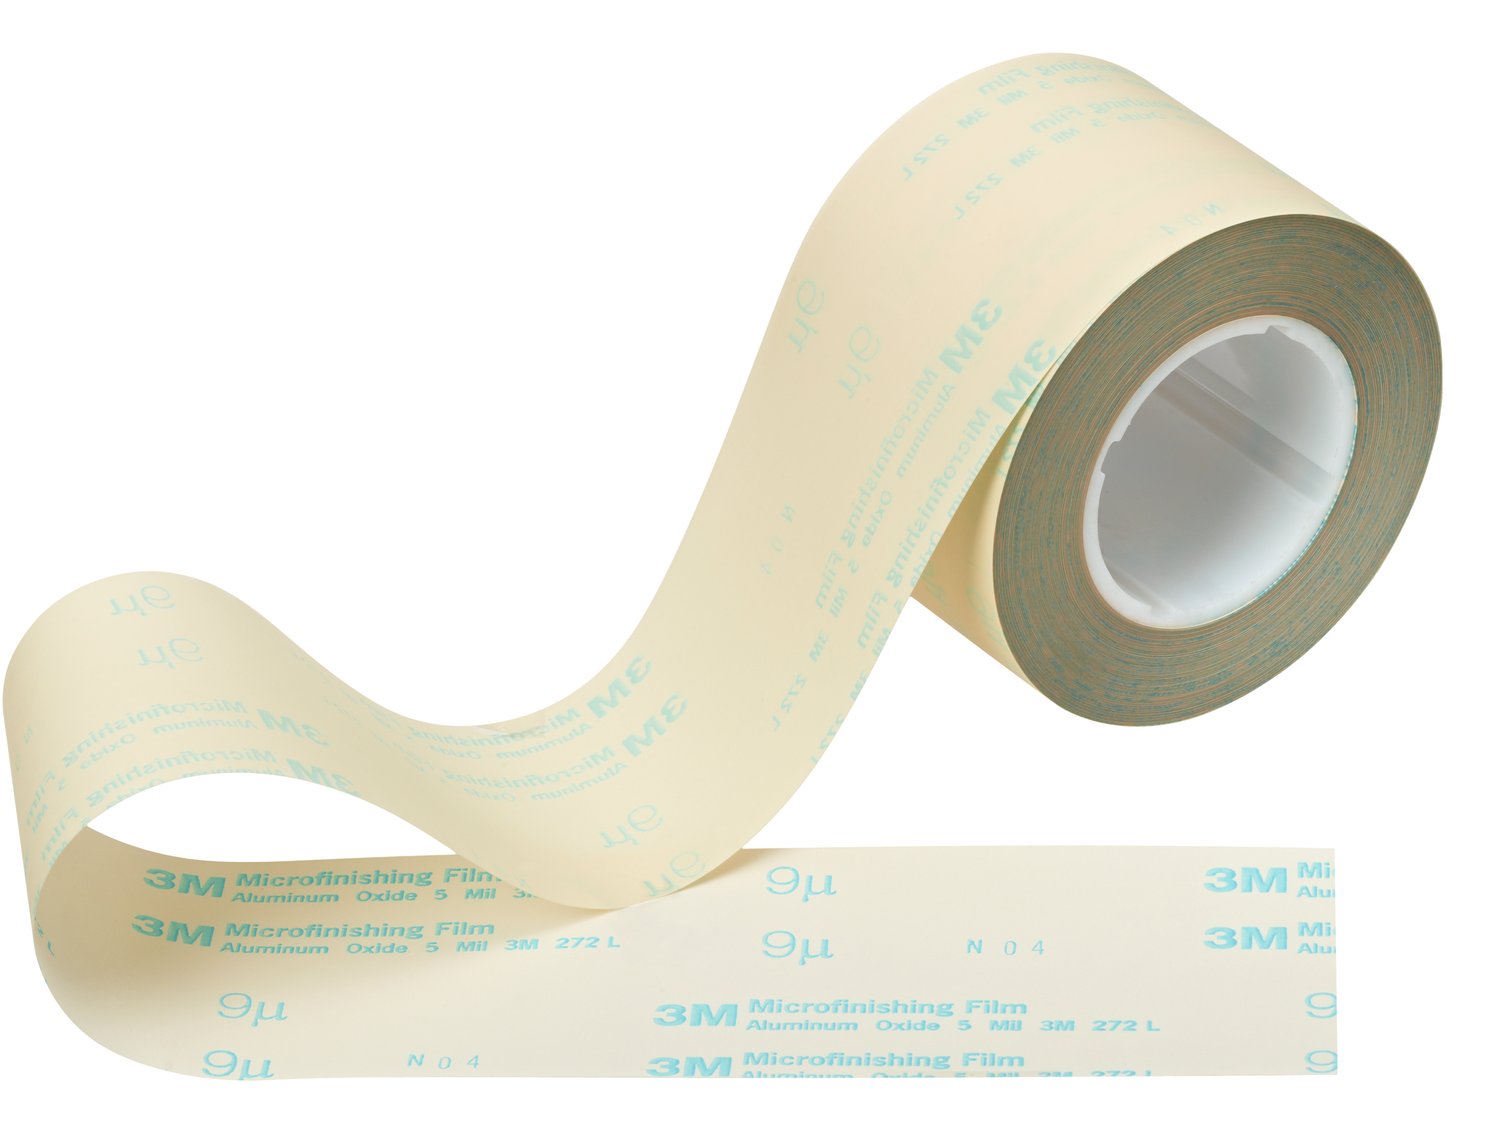 7010533793 - 3M Microfinishing Film Roll 272L, 80 Mic 5MIL, Type UK, 8 in x 150 ft x
3 in (203.2mmx45.75m), Keyed Core, ASO